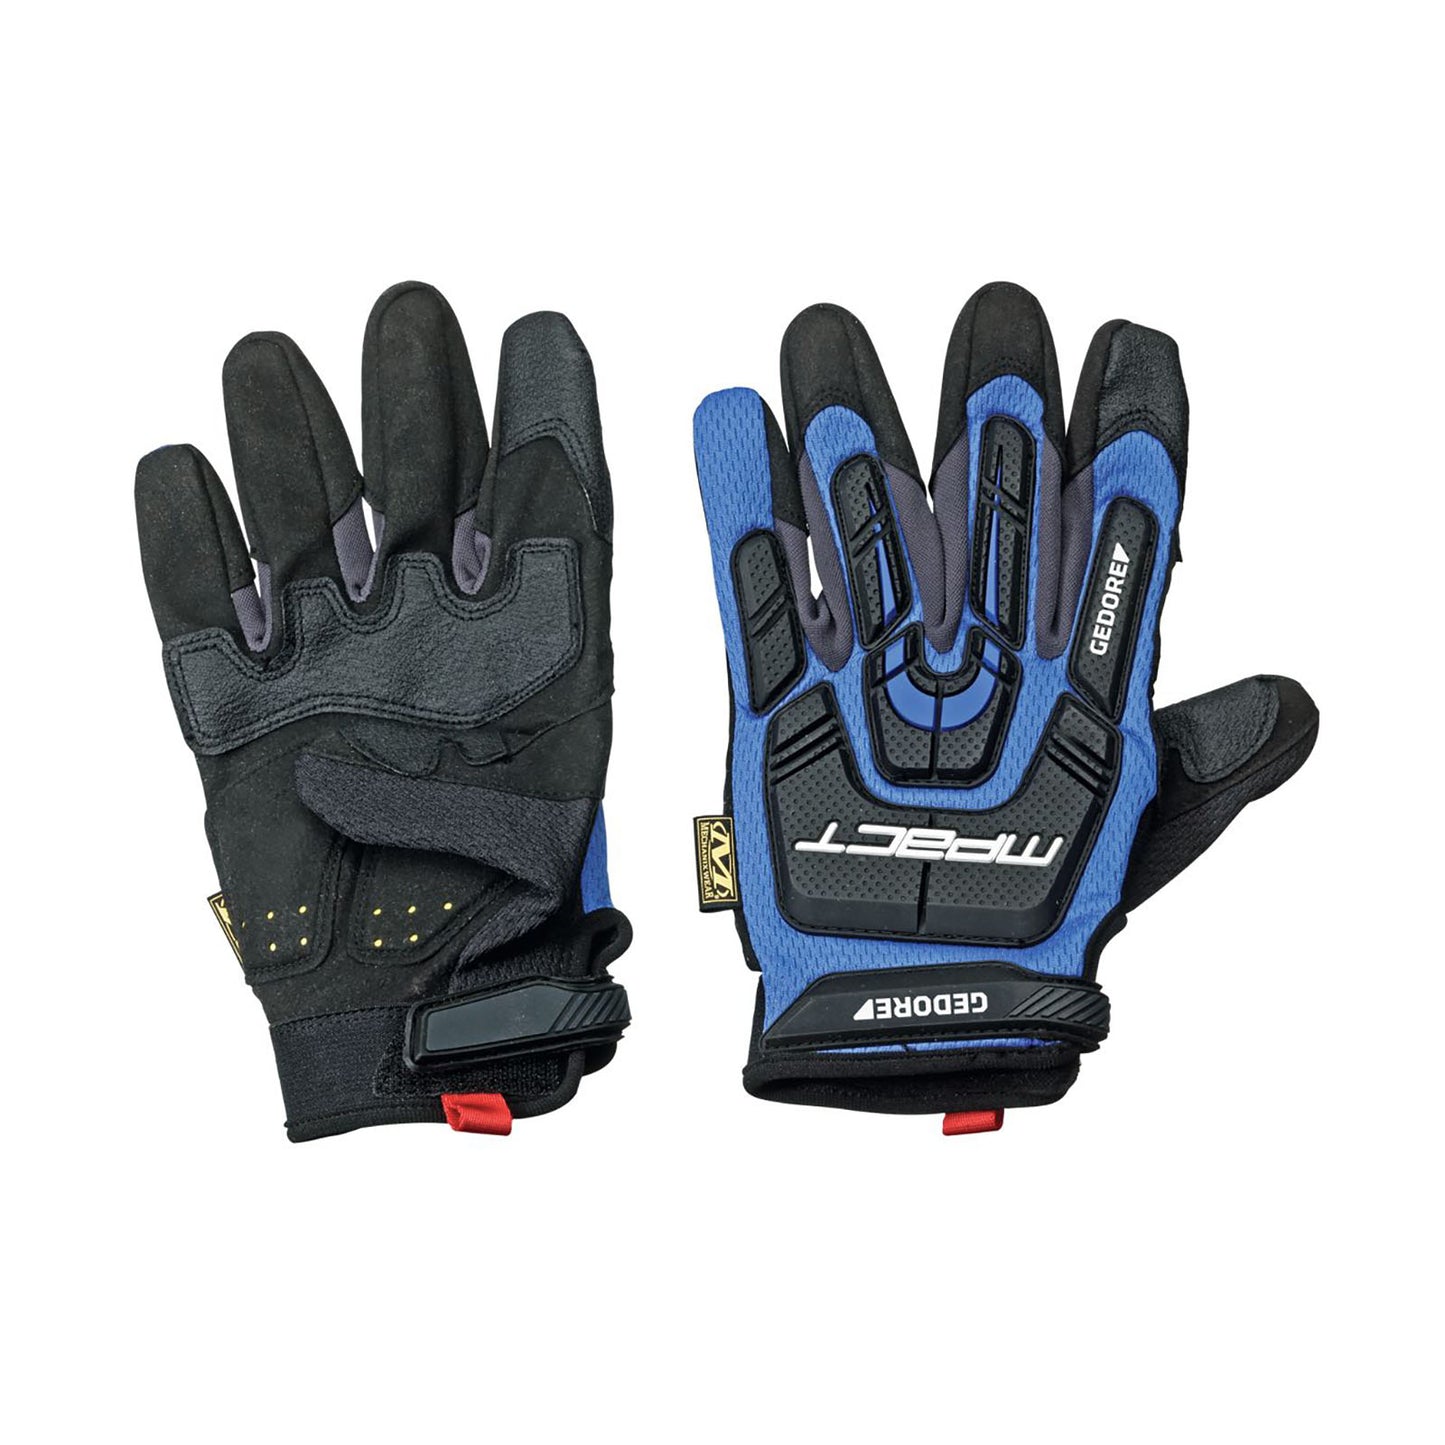 GEDORE 922 9 - M-PACT Gloves Size M/9 (1938746)